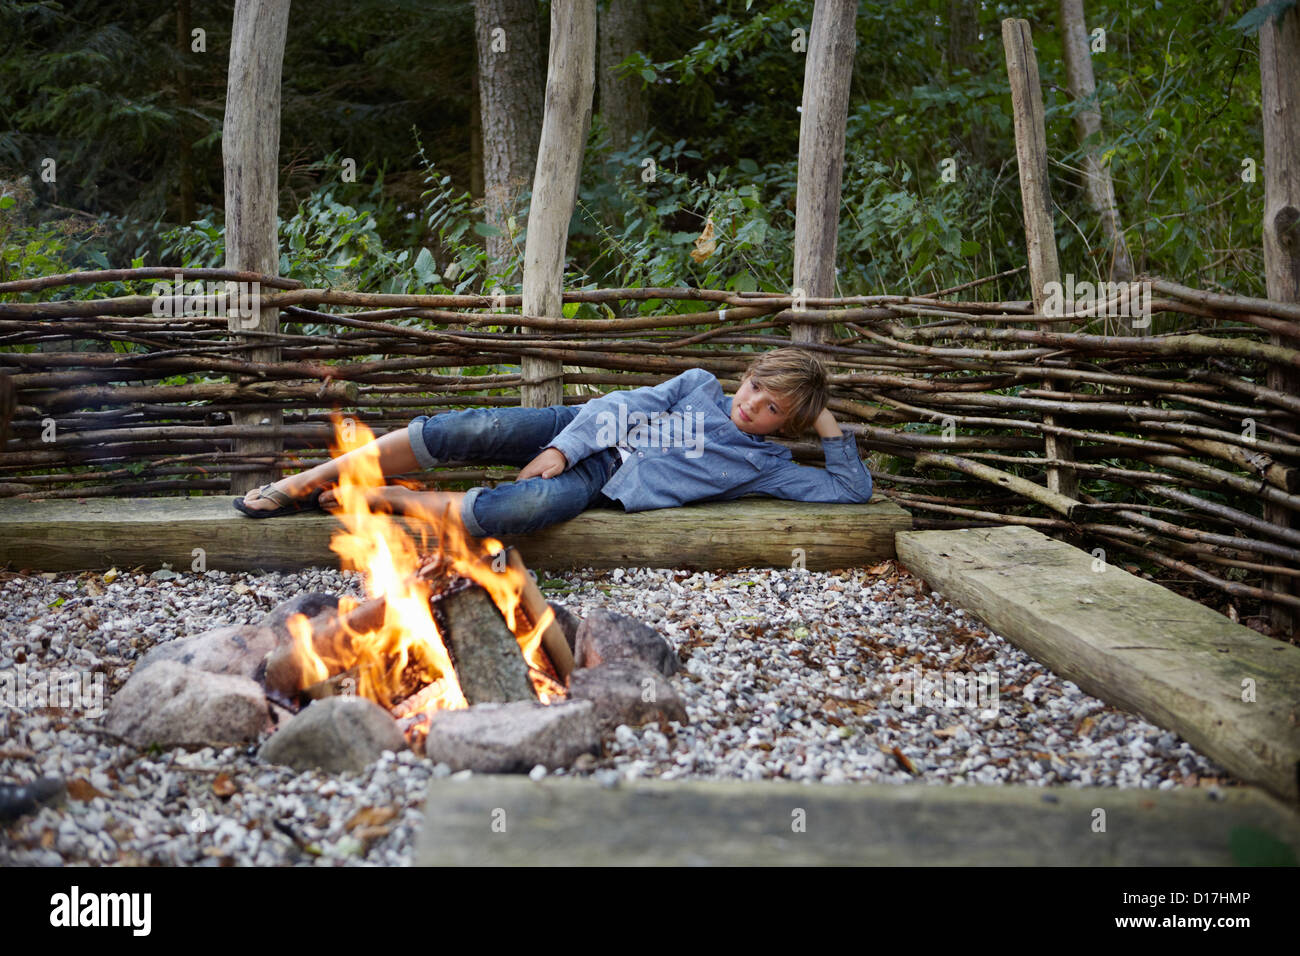 Boy relaxing by fire outdoors Stock Photo